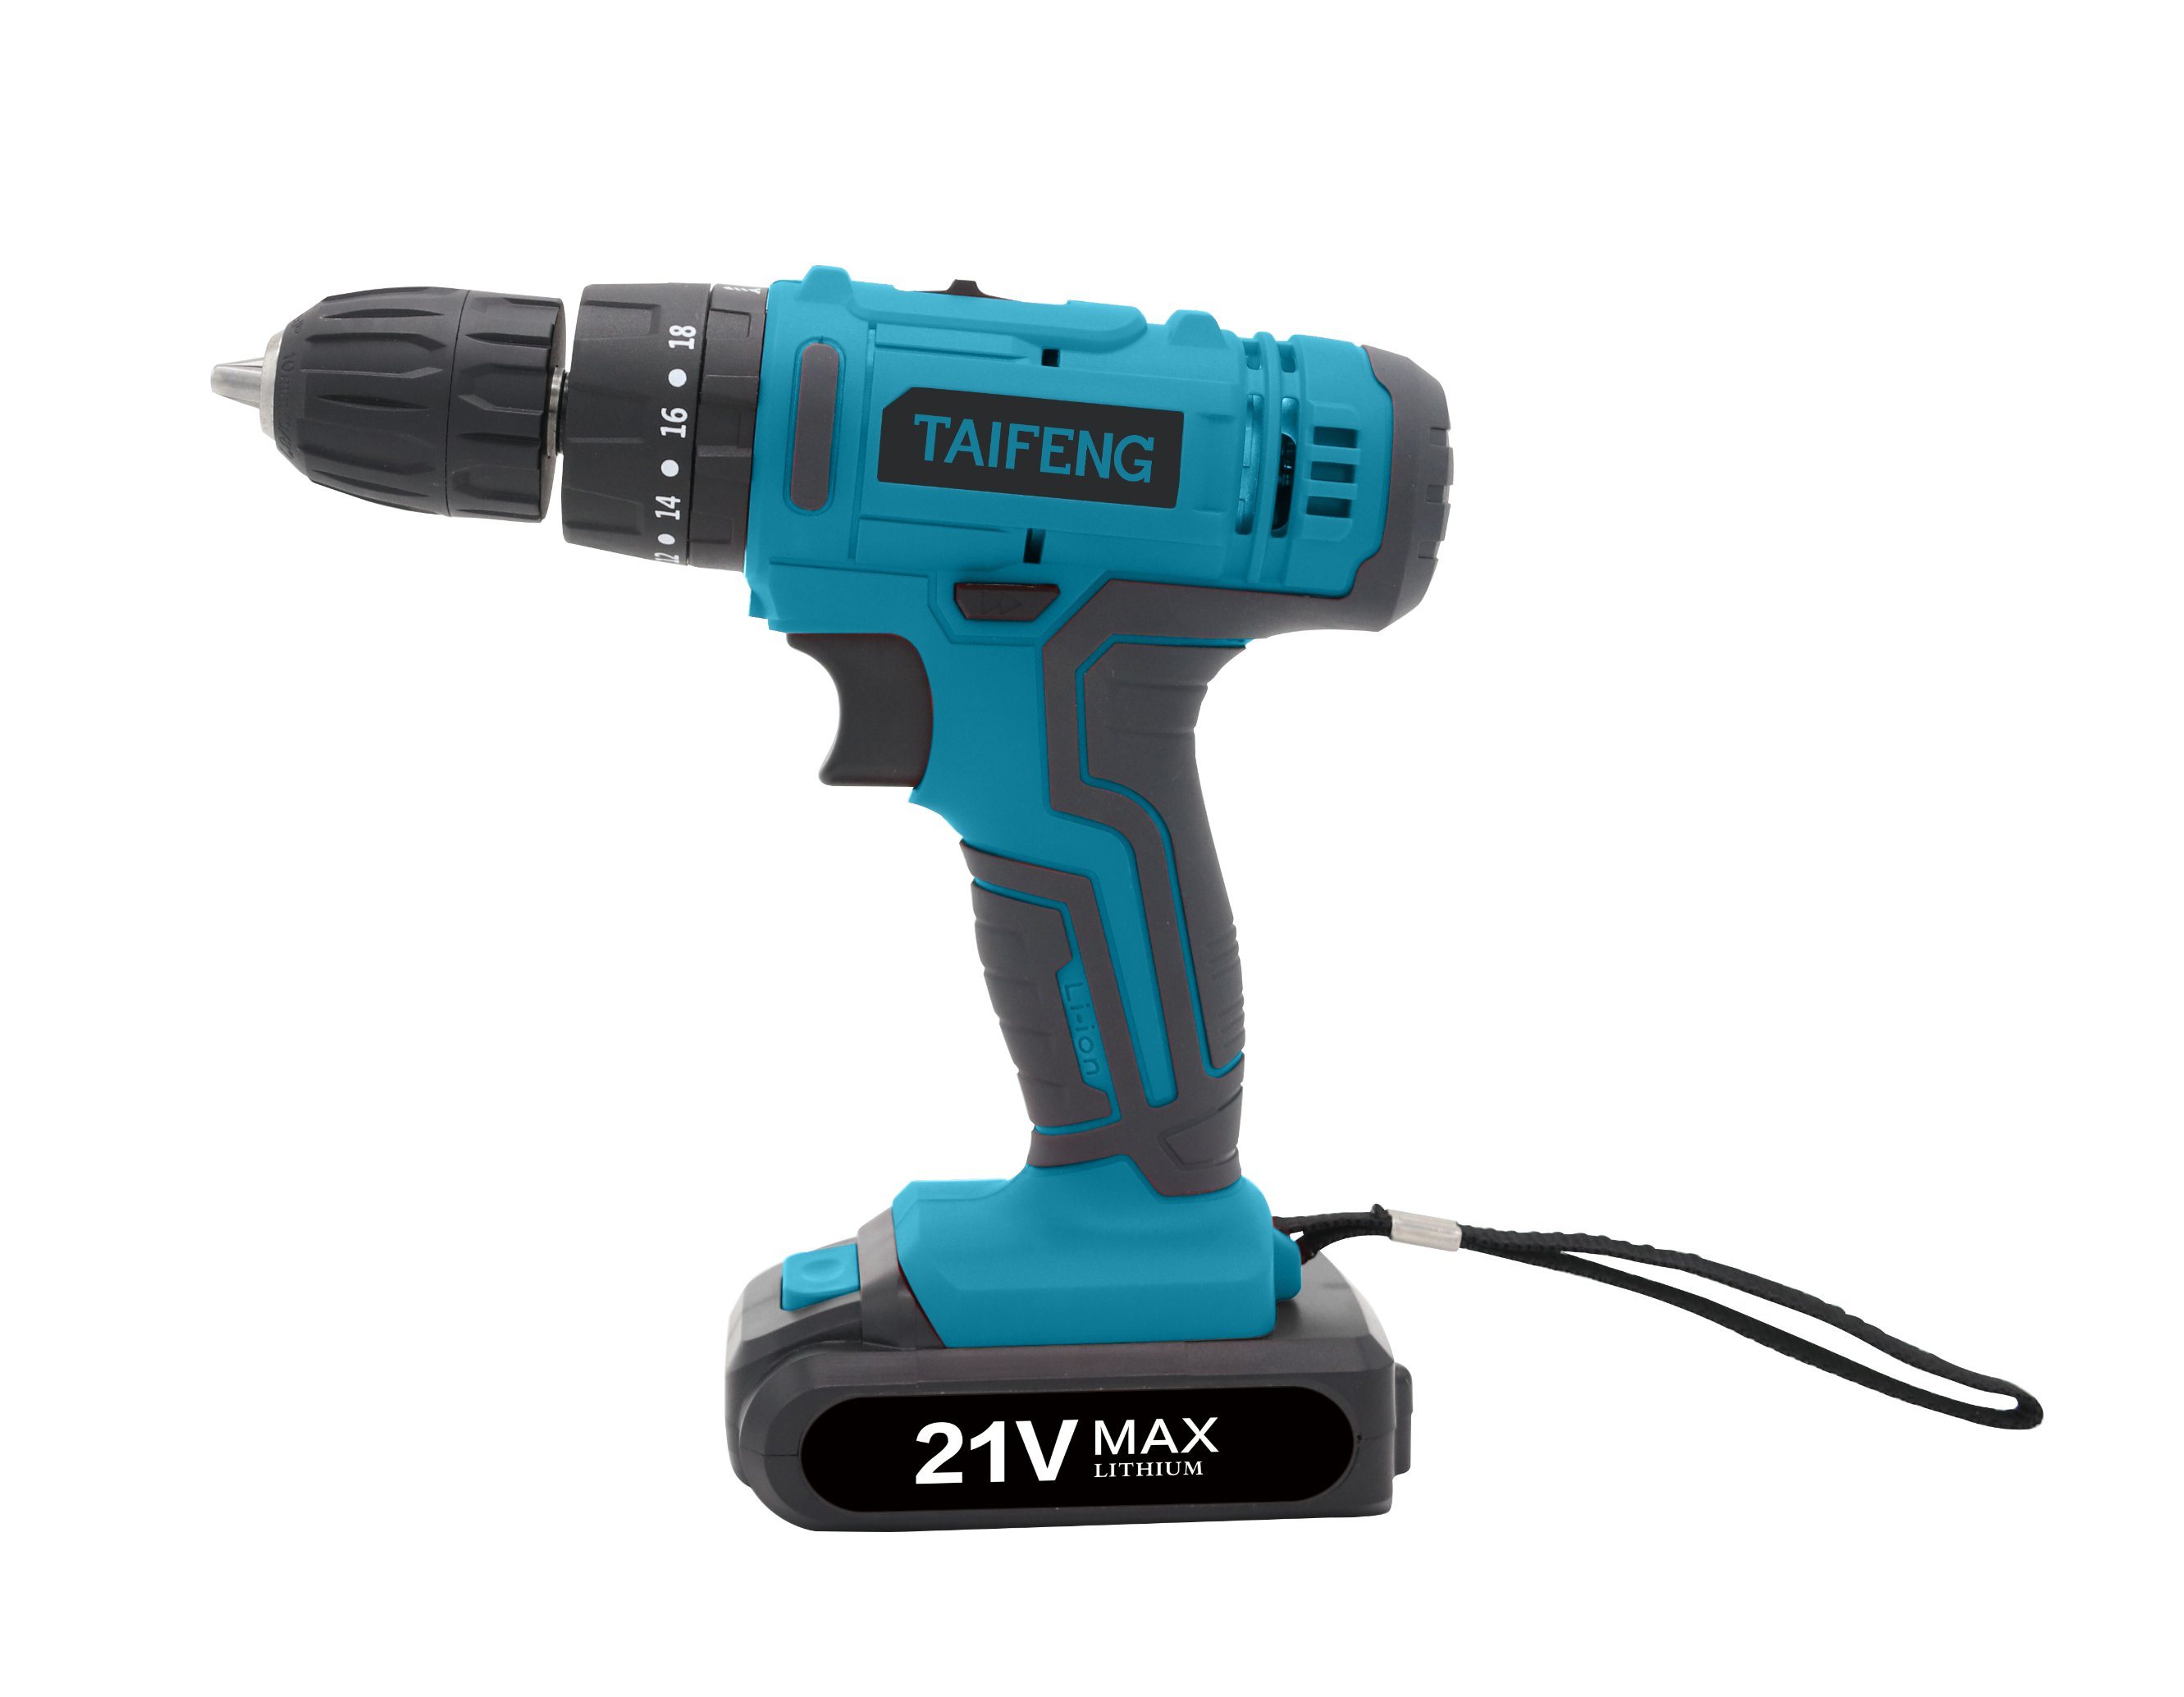 10mm 21V Cordless Impact Drill Power Tool with Li Ion Battery (TTZ21BC)